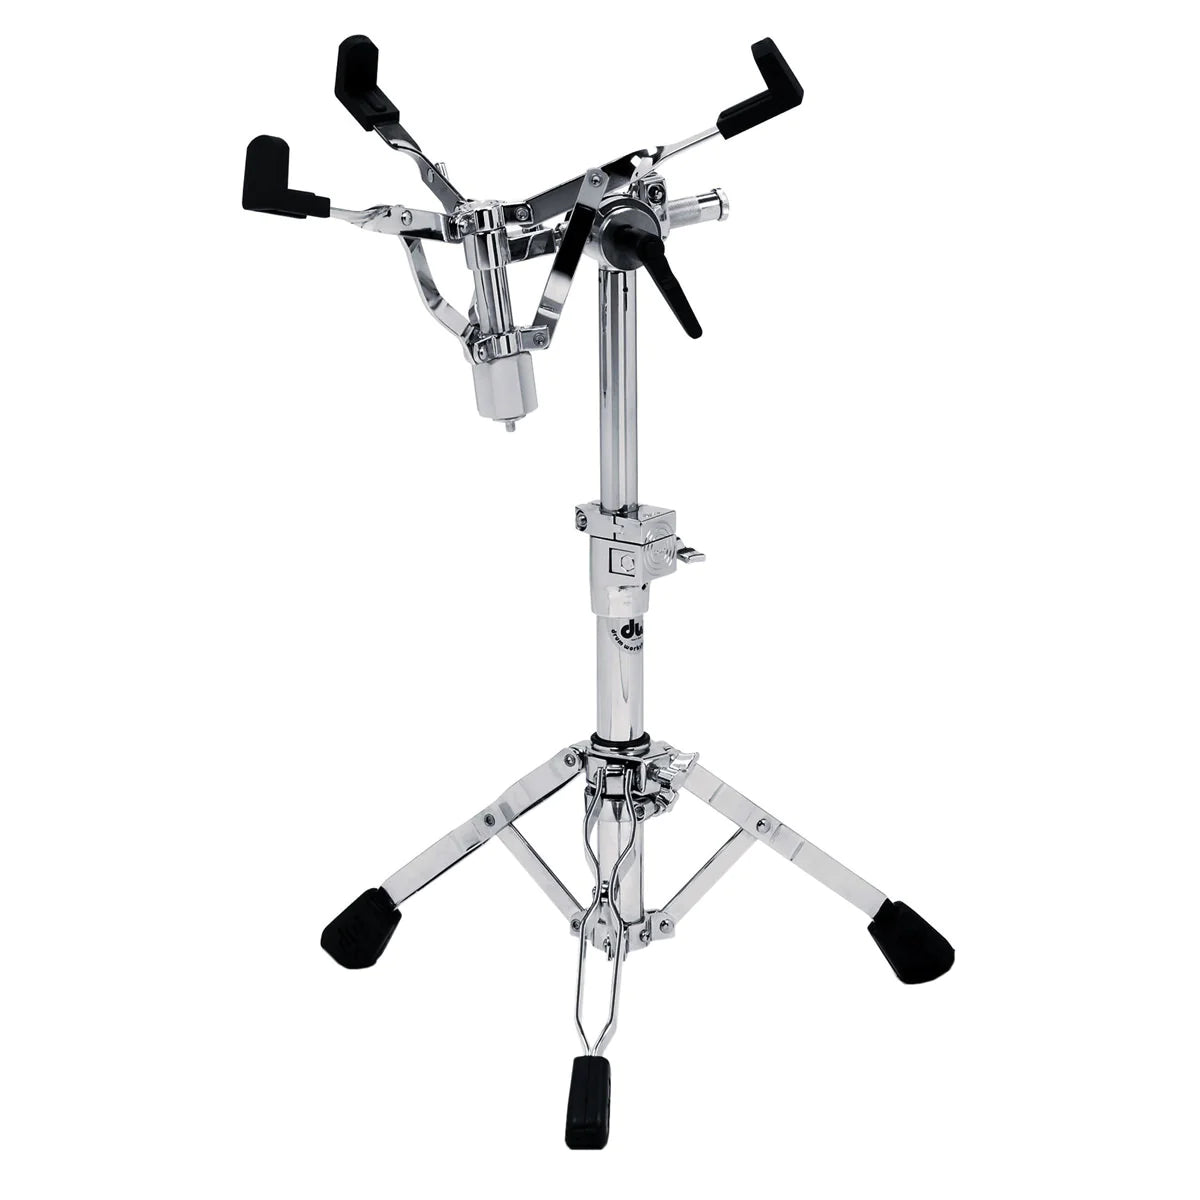 DW 9300AL Air Lift Snare Stand